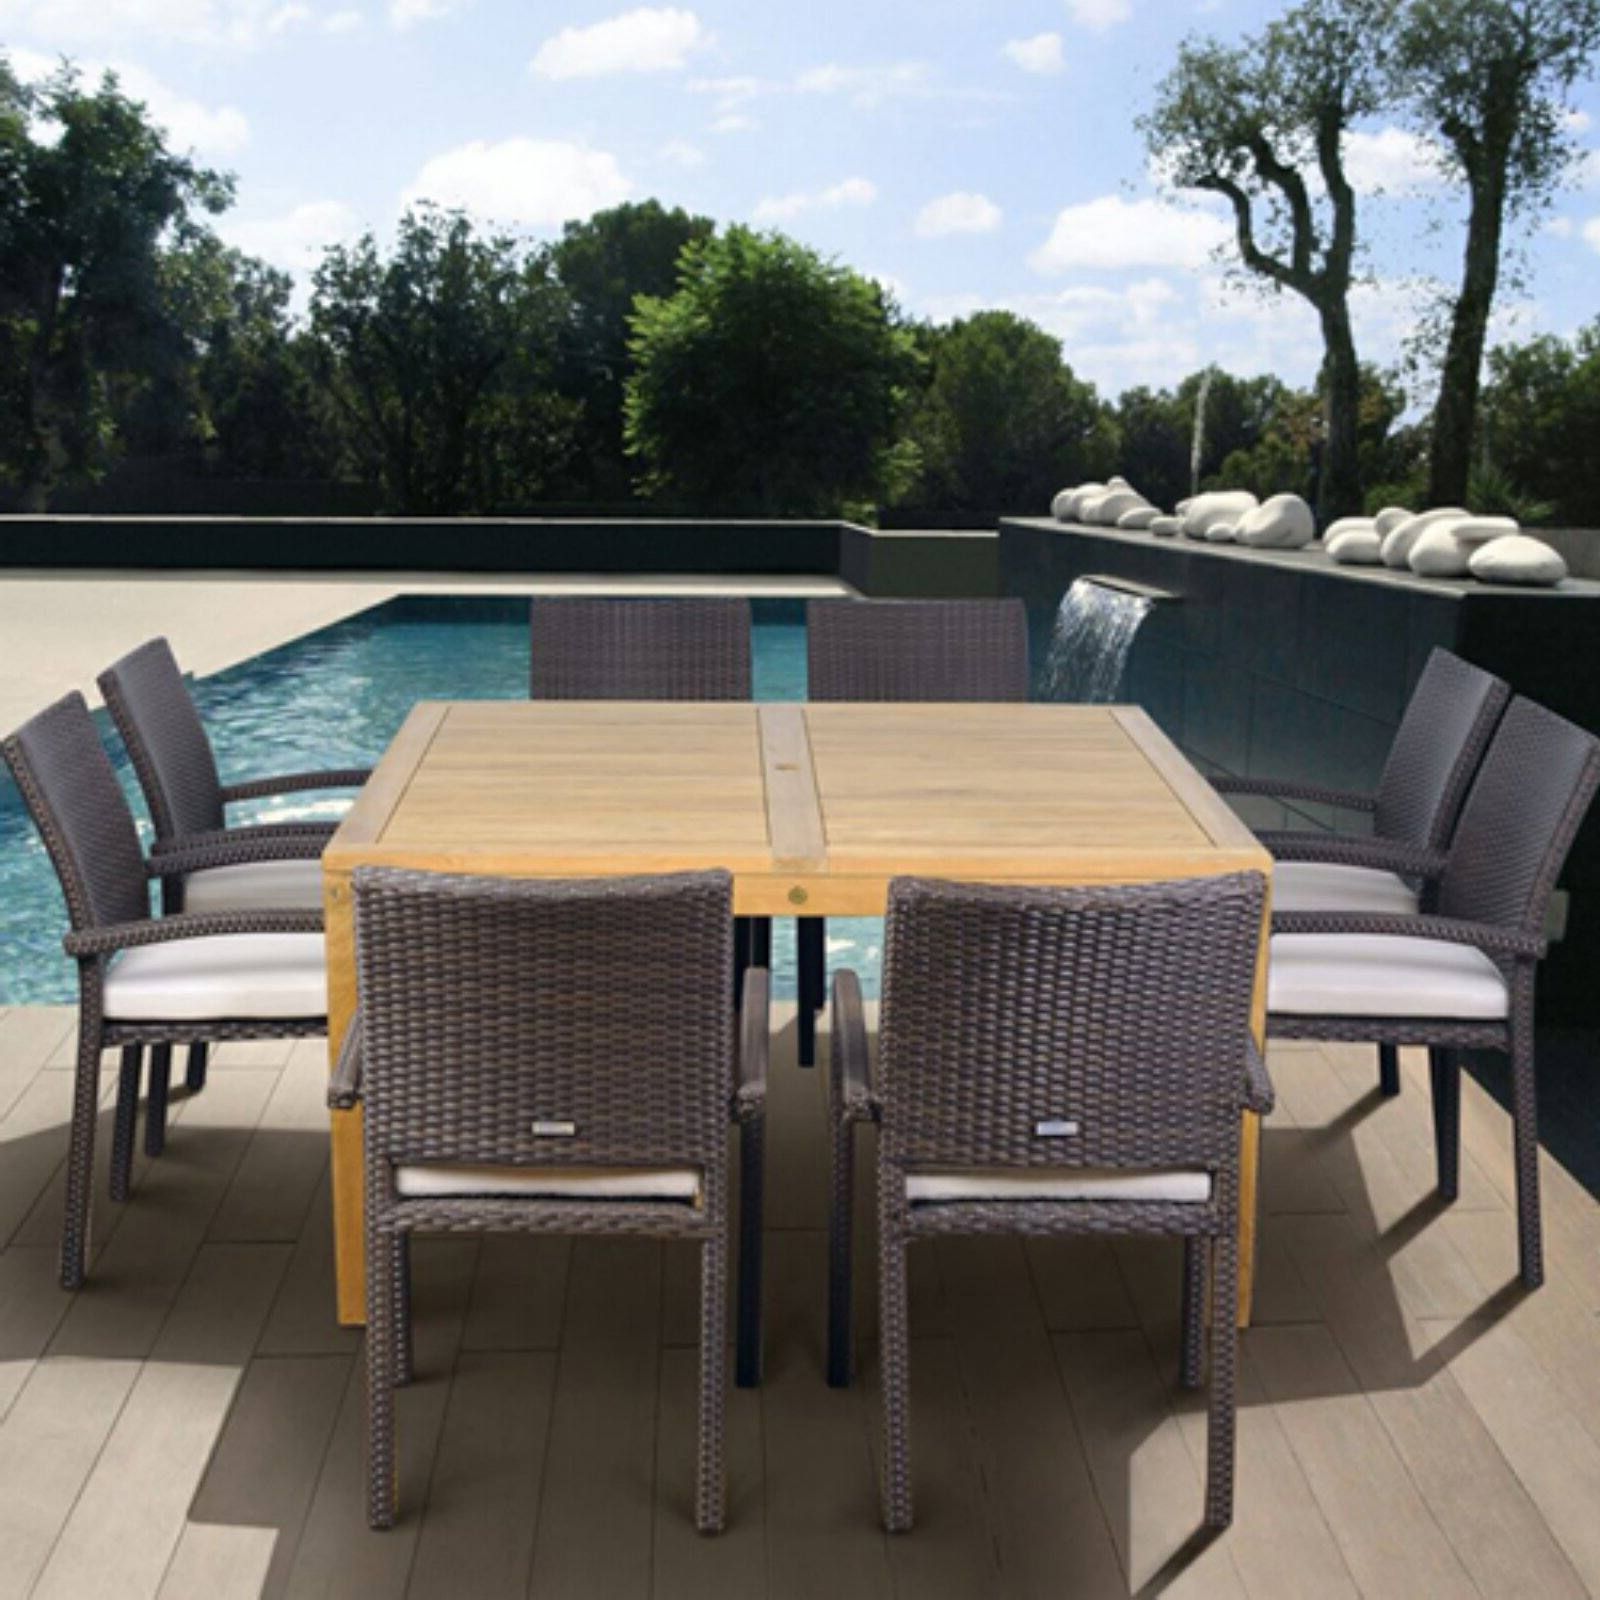 Amazonia Davenport 9 Piece Teak/wicker Square Patio Dining Set Inside Well Known 9 Piece Square Patio Dining Sets (View 7 of 15)